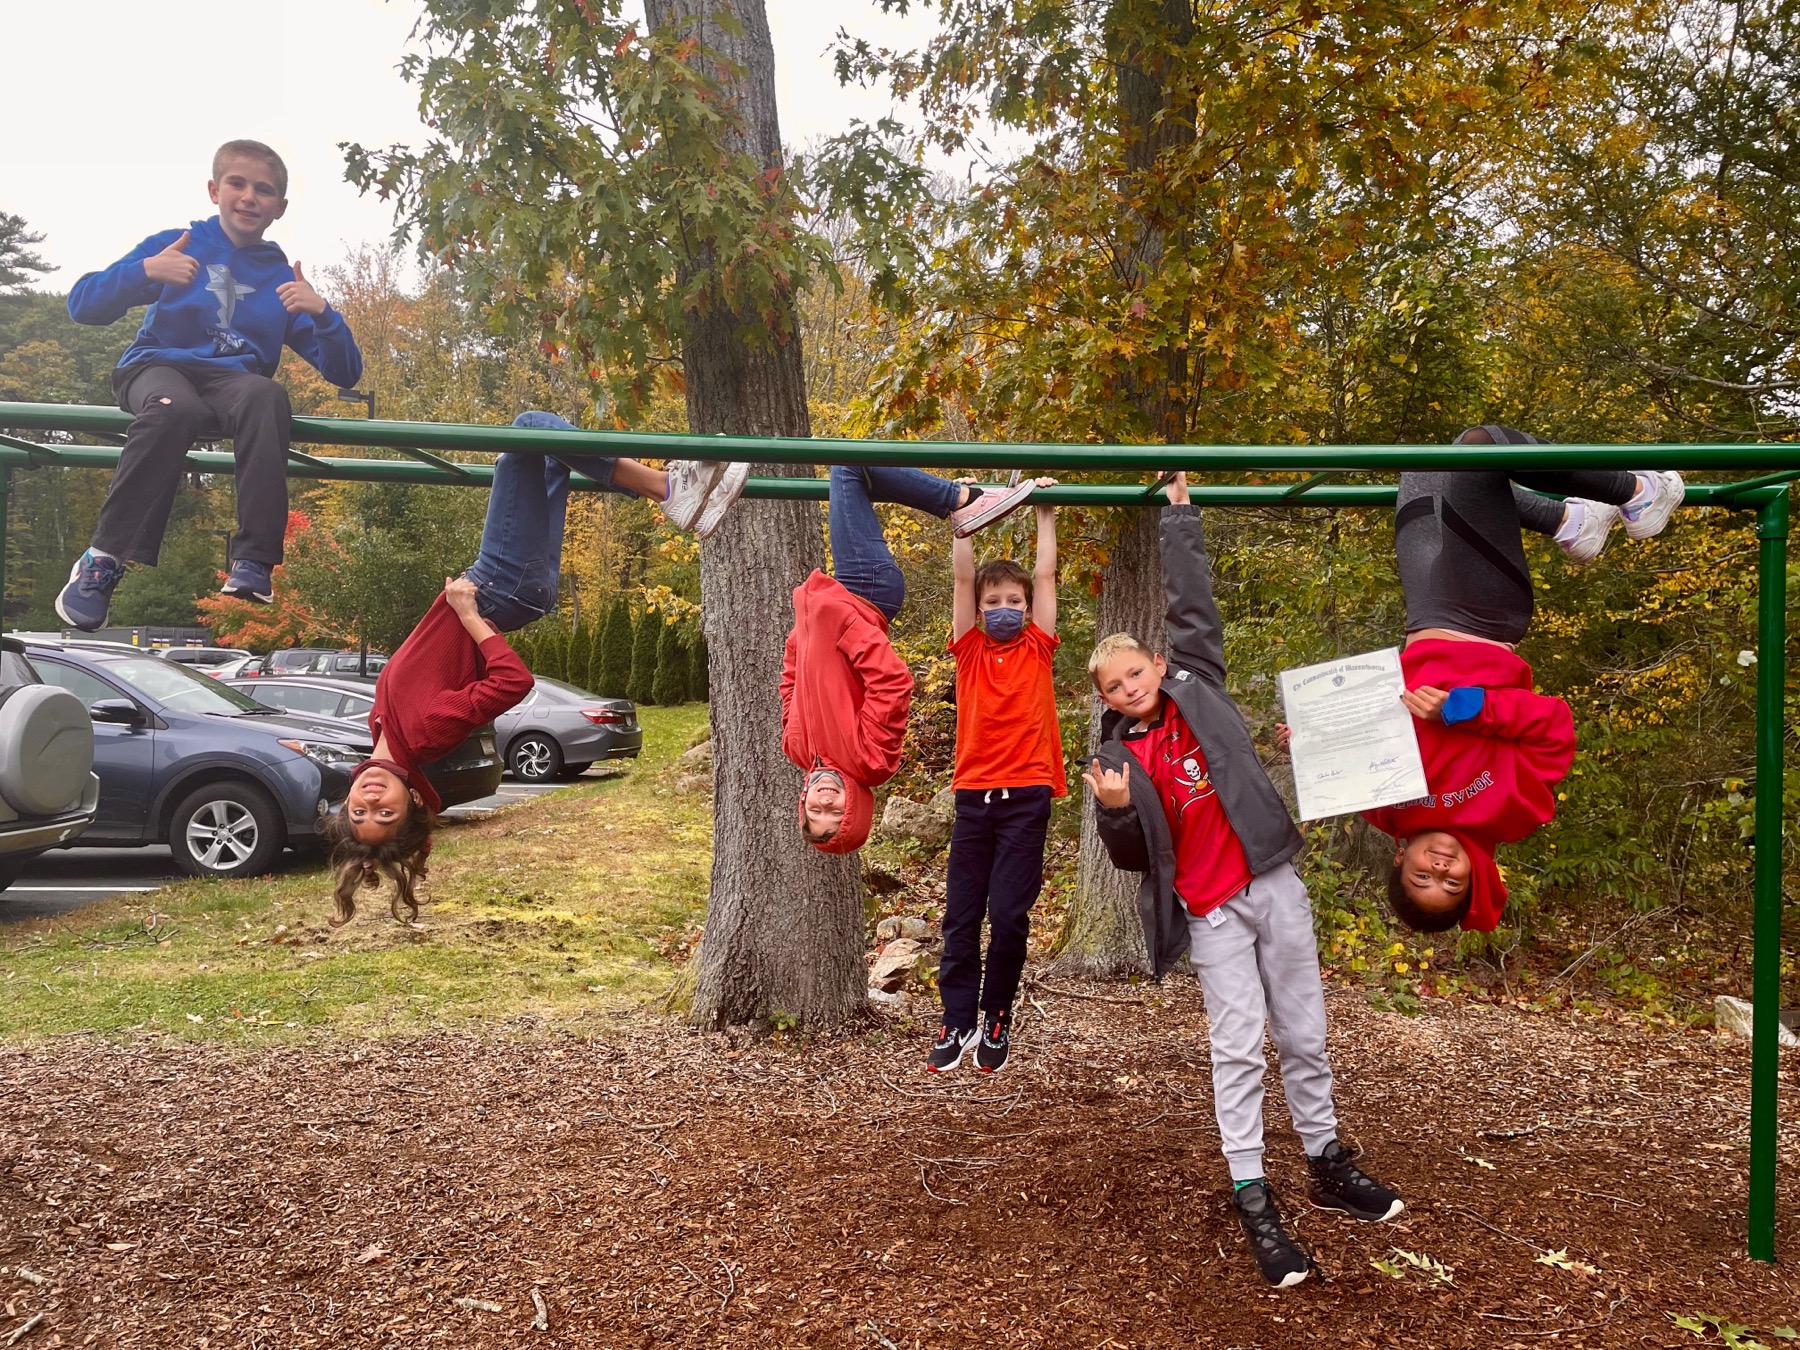 Kids on monkey bars wearing red for Dyslexia Awareness Month